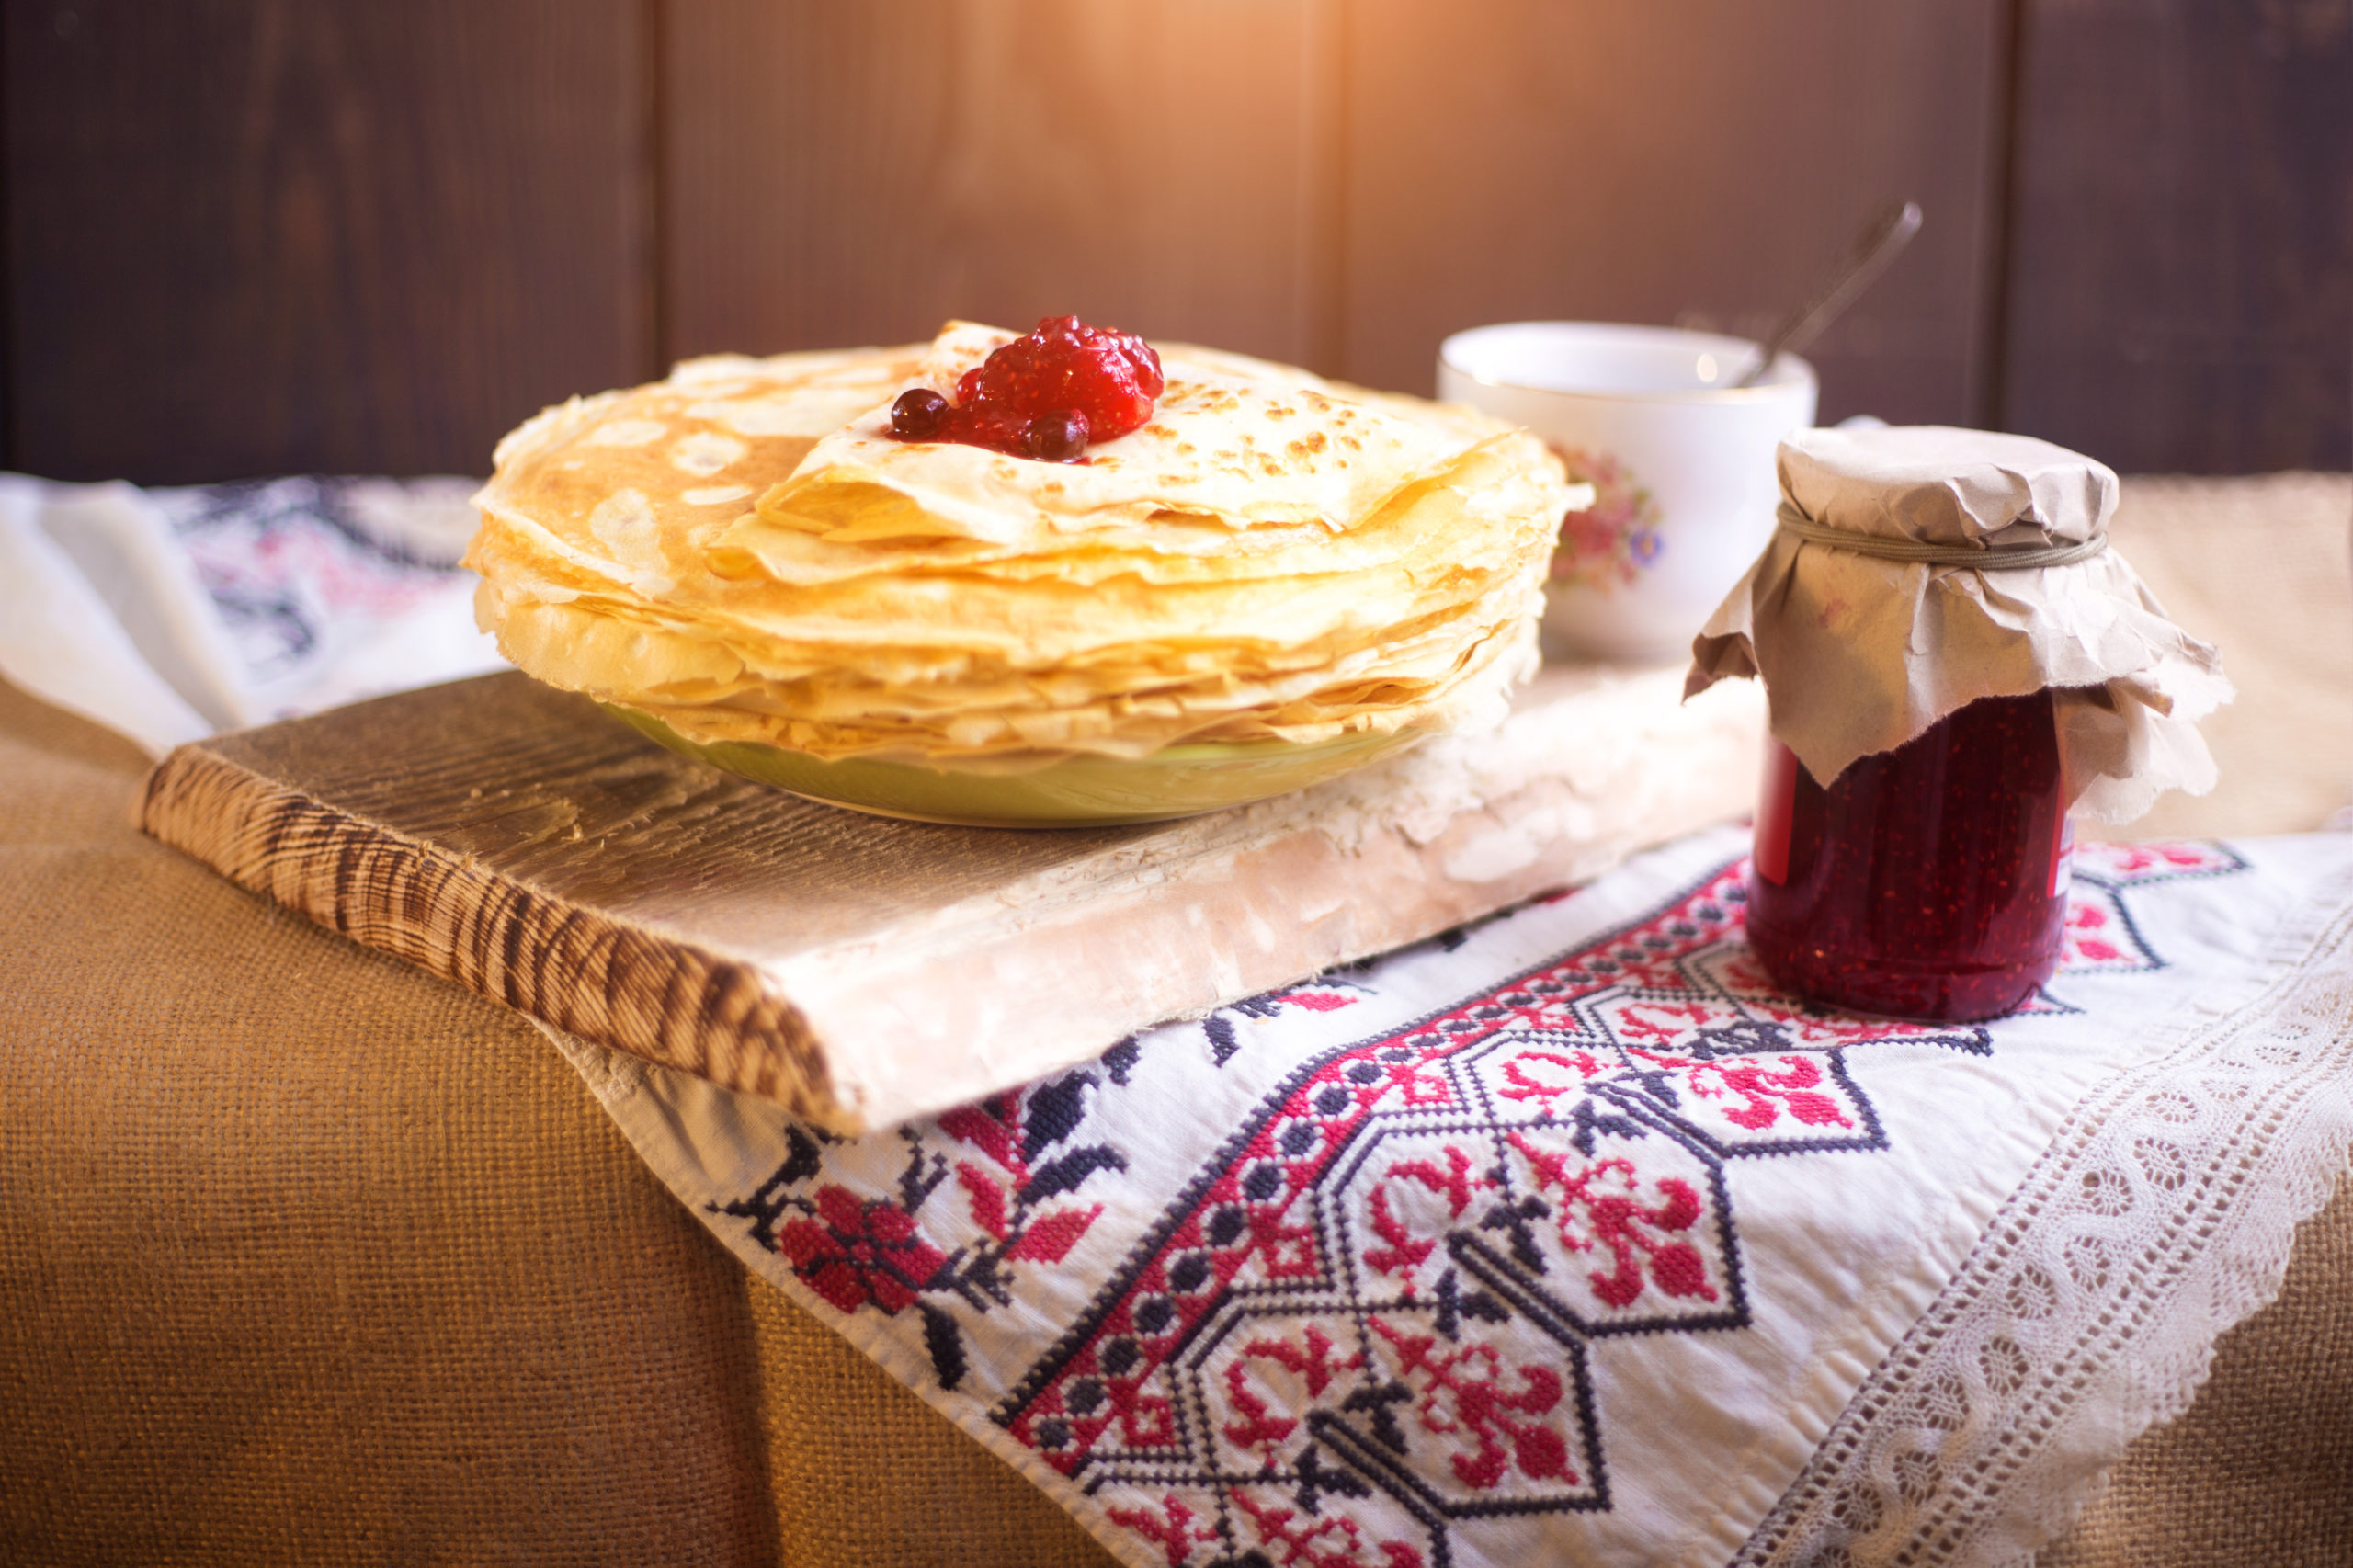 Homemade hot pancakes with jam. Rustic style, crepes closeup.